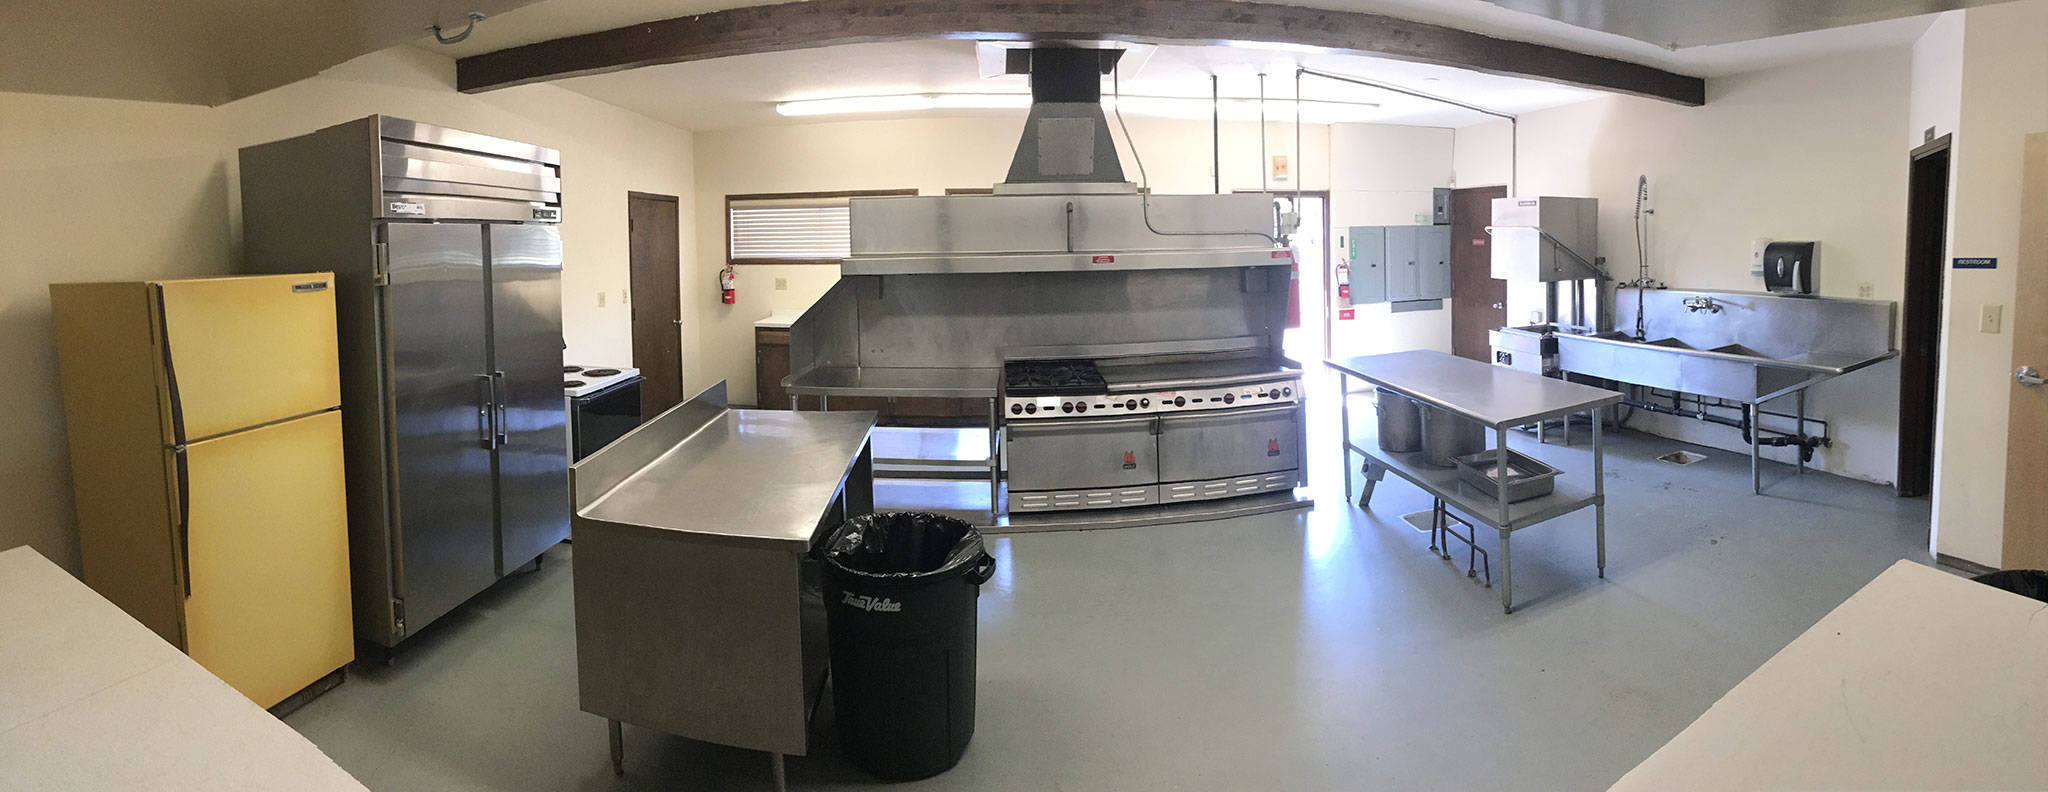 The Guy Cole Convention Center’s kitchen and breakout rooms will see an overhaul later this year after Sequim city councilors approved on June 26 up to $166,000 in improvements in the spaces. Sequim Gazette photo by Matthew Nash